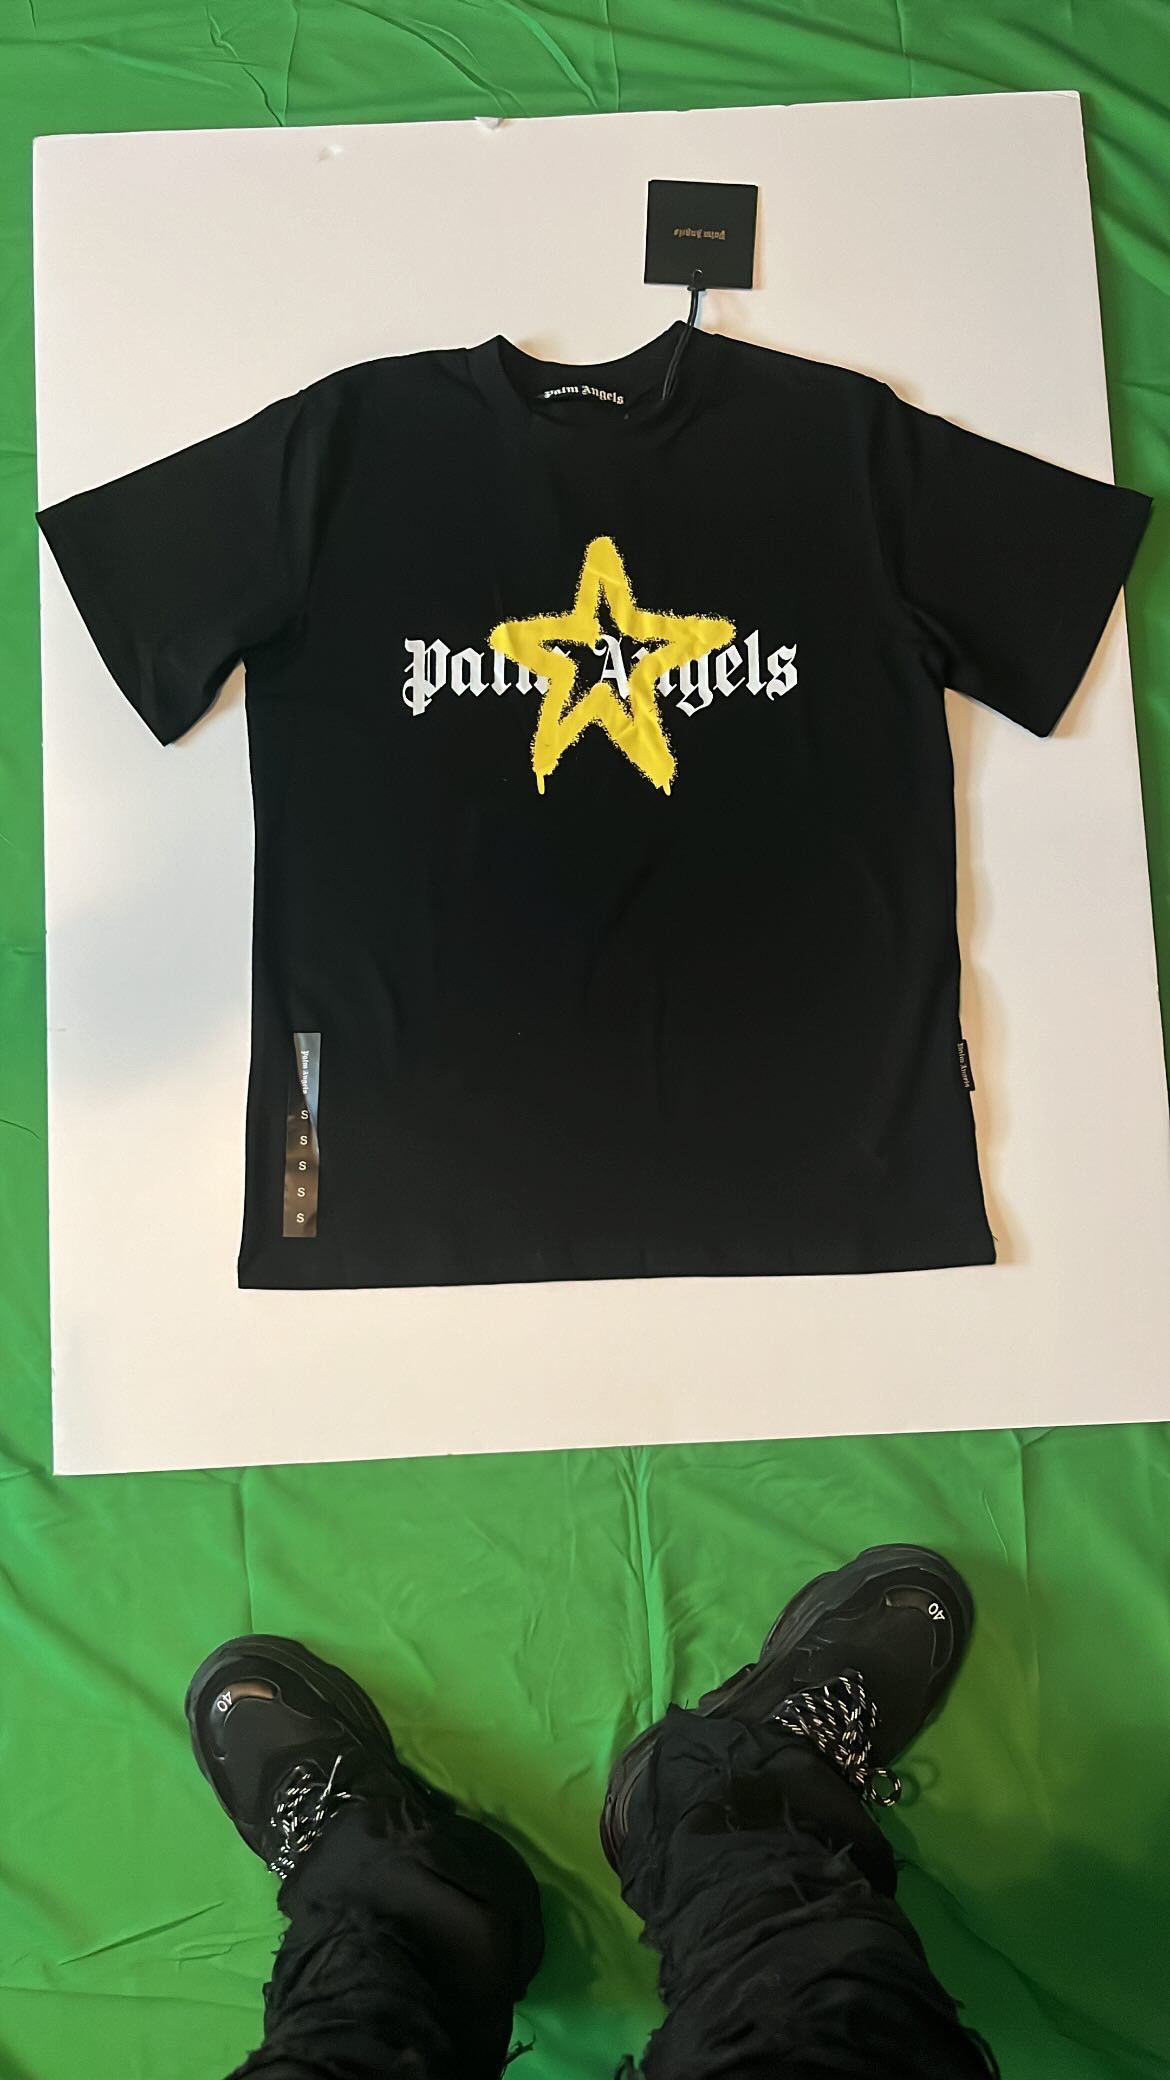 Plan Angels Star Painted T Shirt 